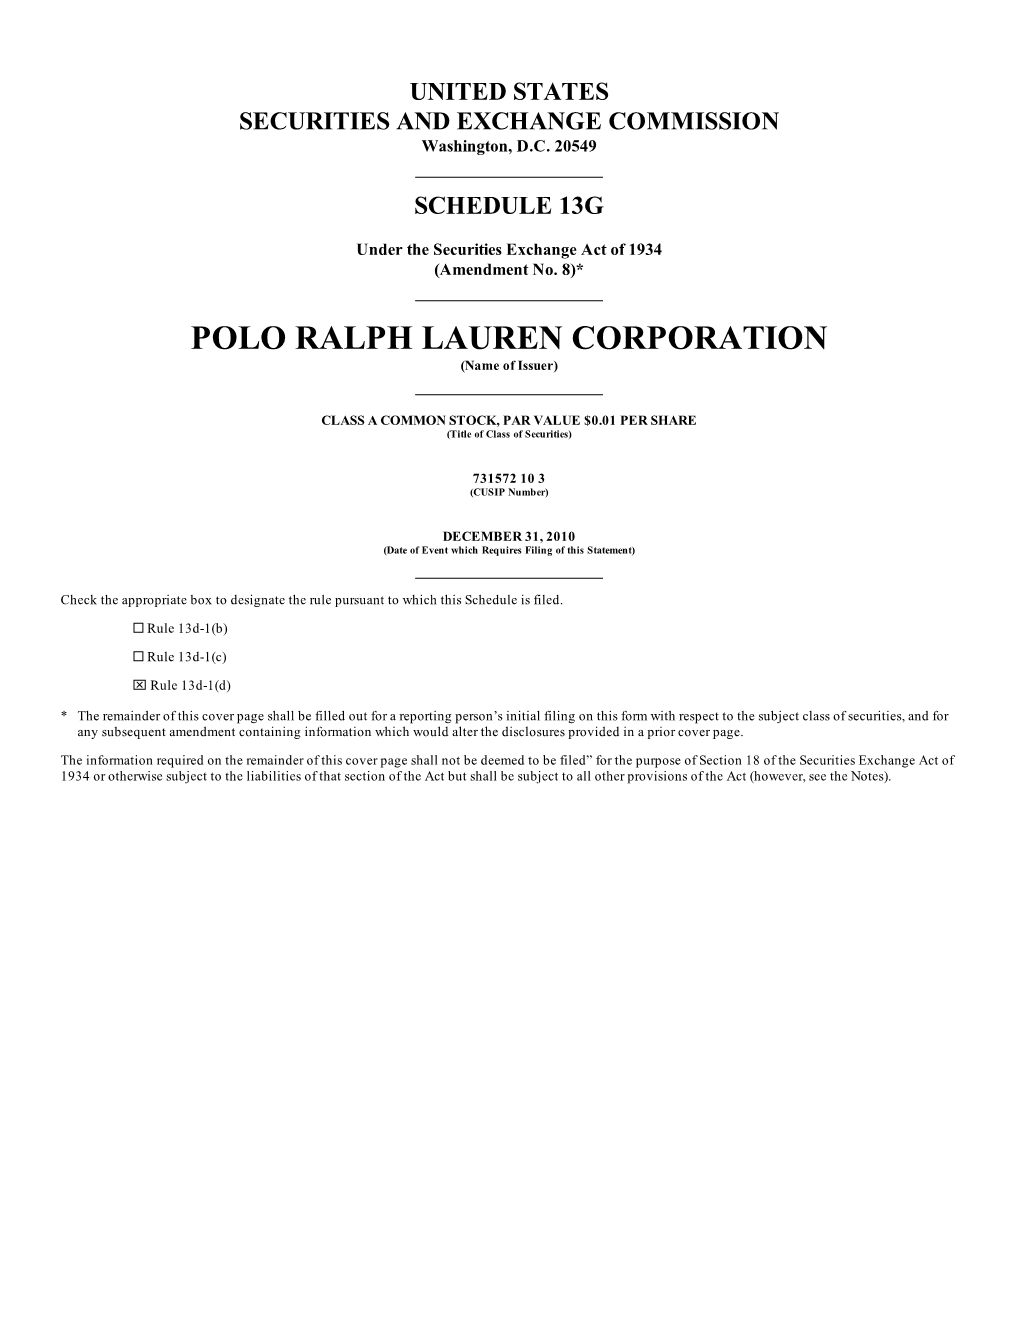 POLO RALPH LAUREN CORPORATION (Name of Issuer)